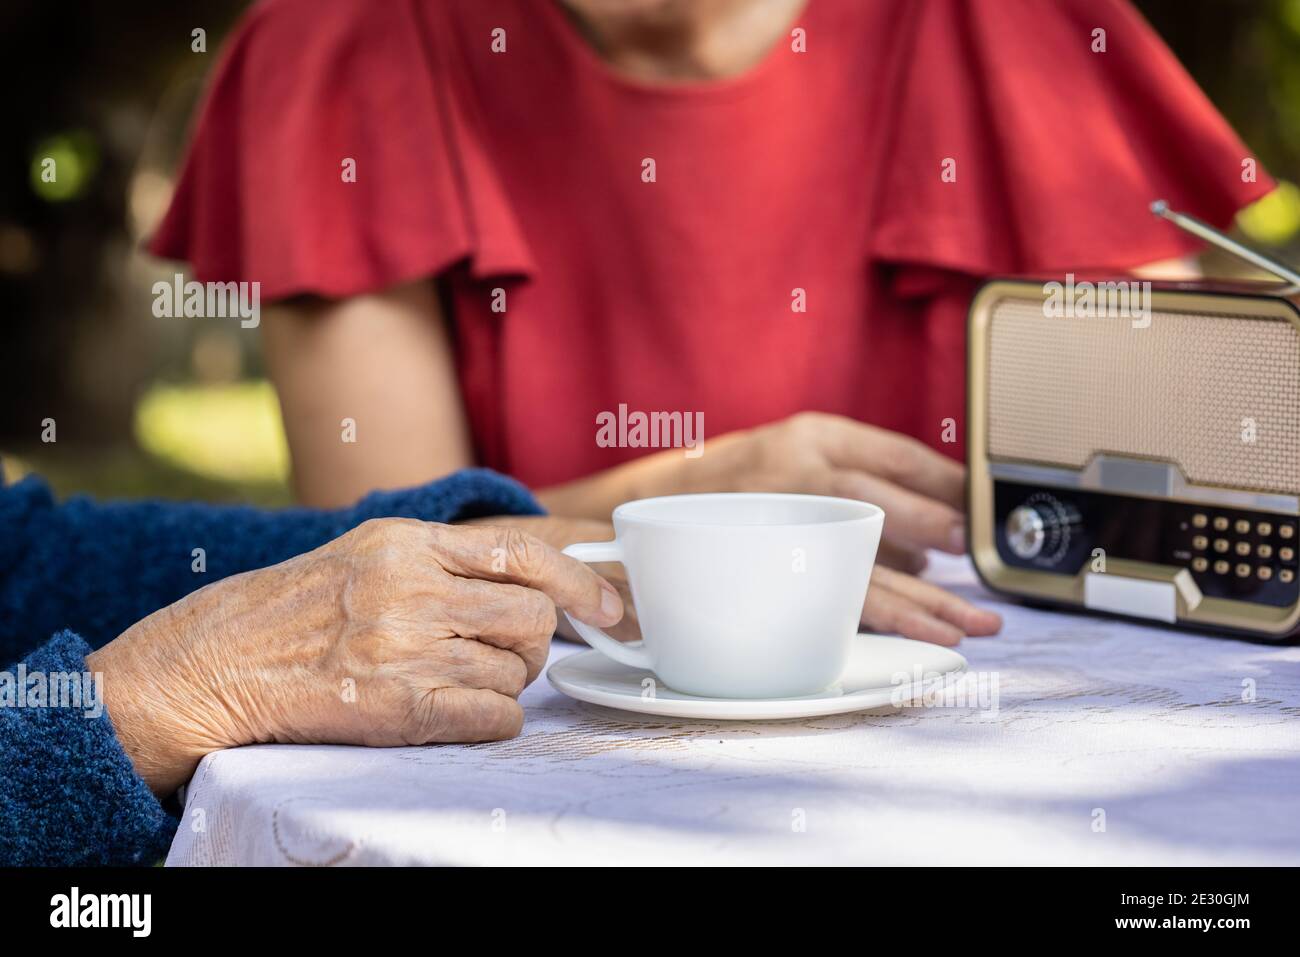 Senior woman relaxing with daughter  in backyard. Stock Photo